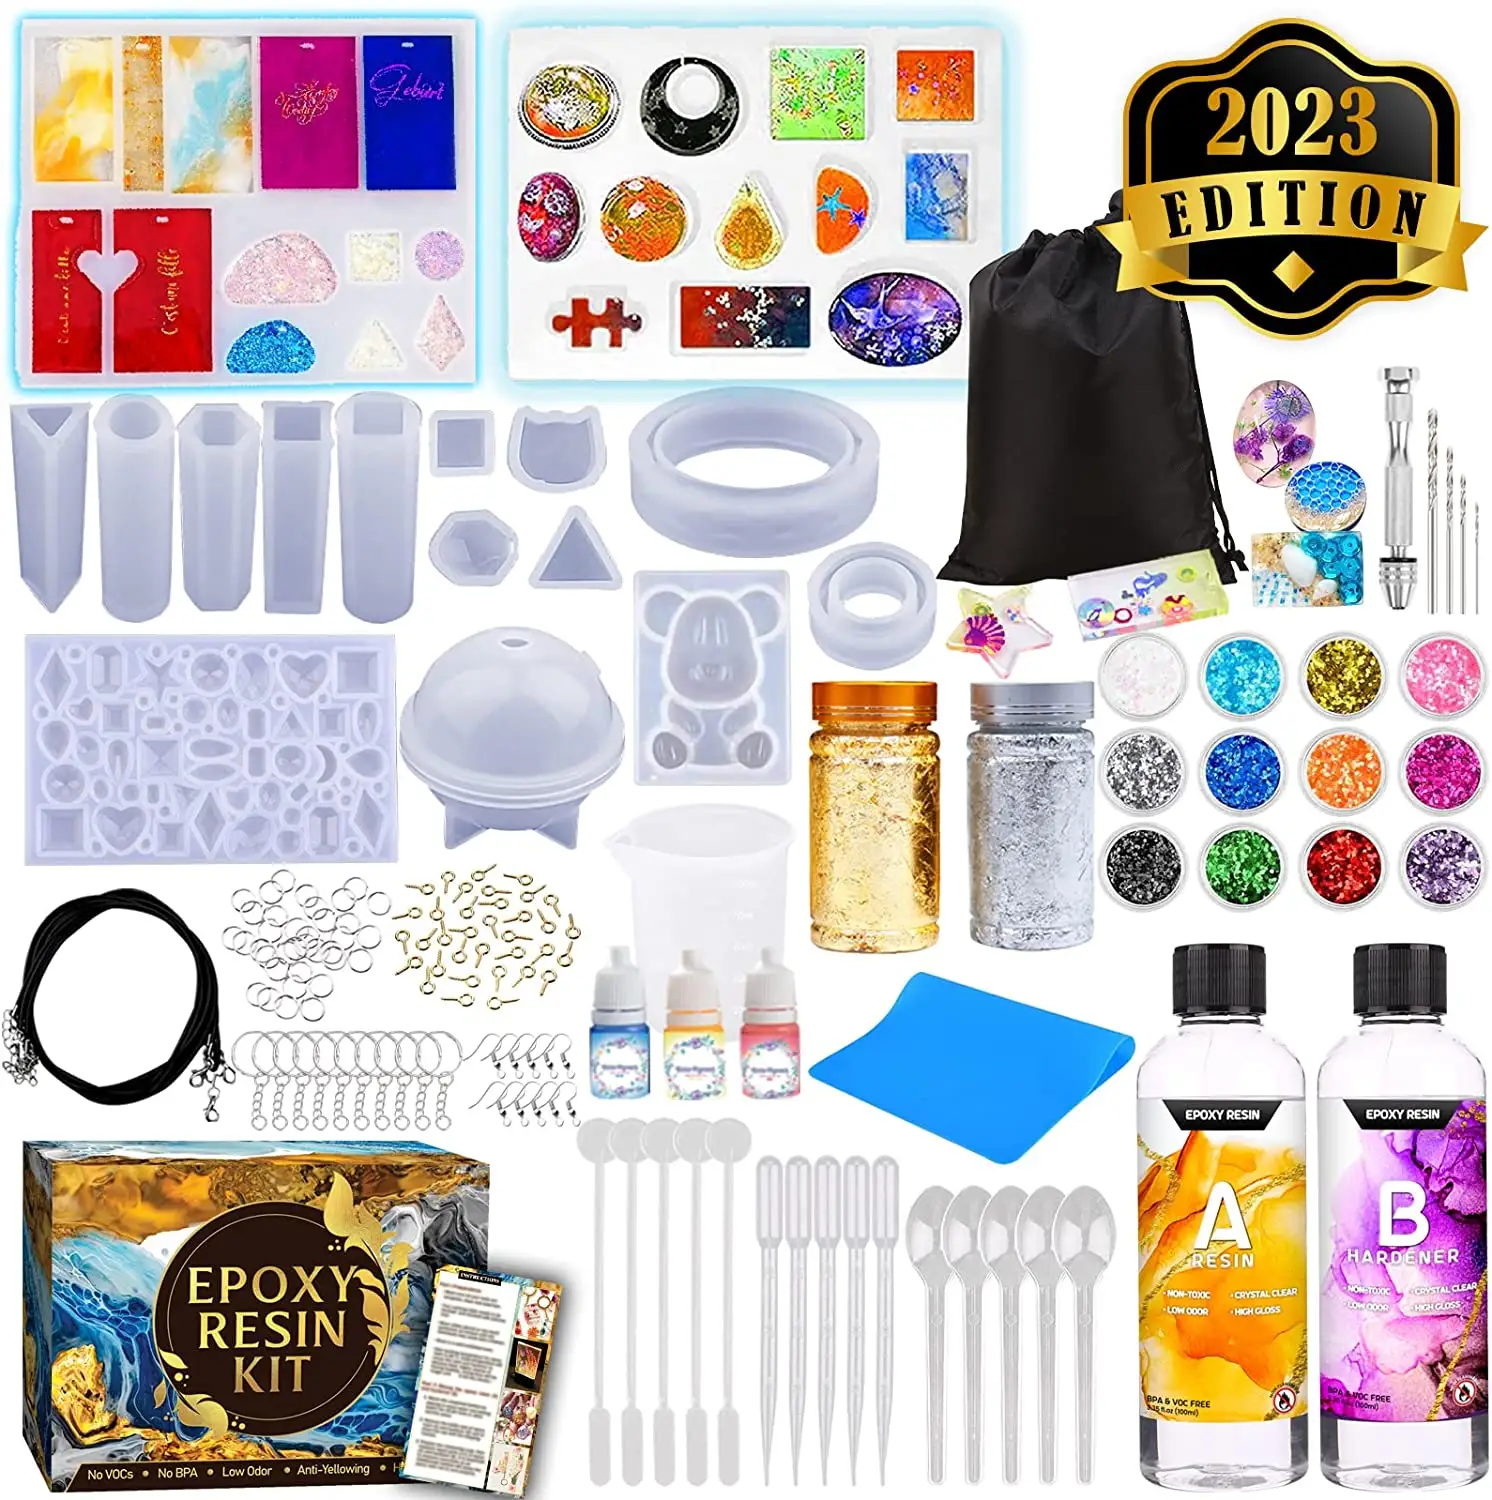 Oxygen Resin Silicone Mold Starter Kit - All-in-one office Home Decorative Art transparent Craft Jewelry Making Kit